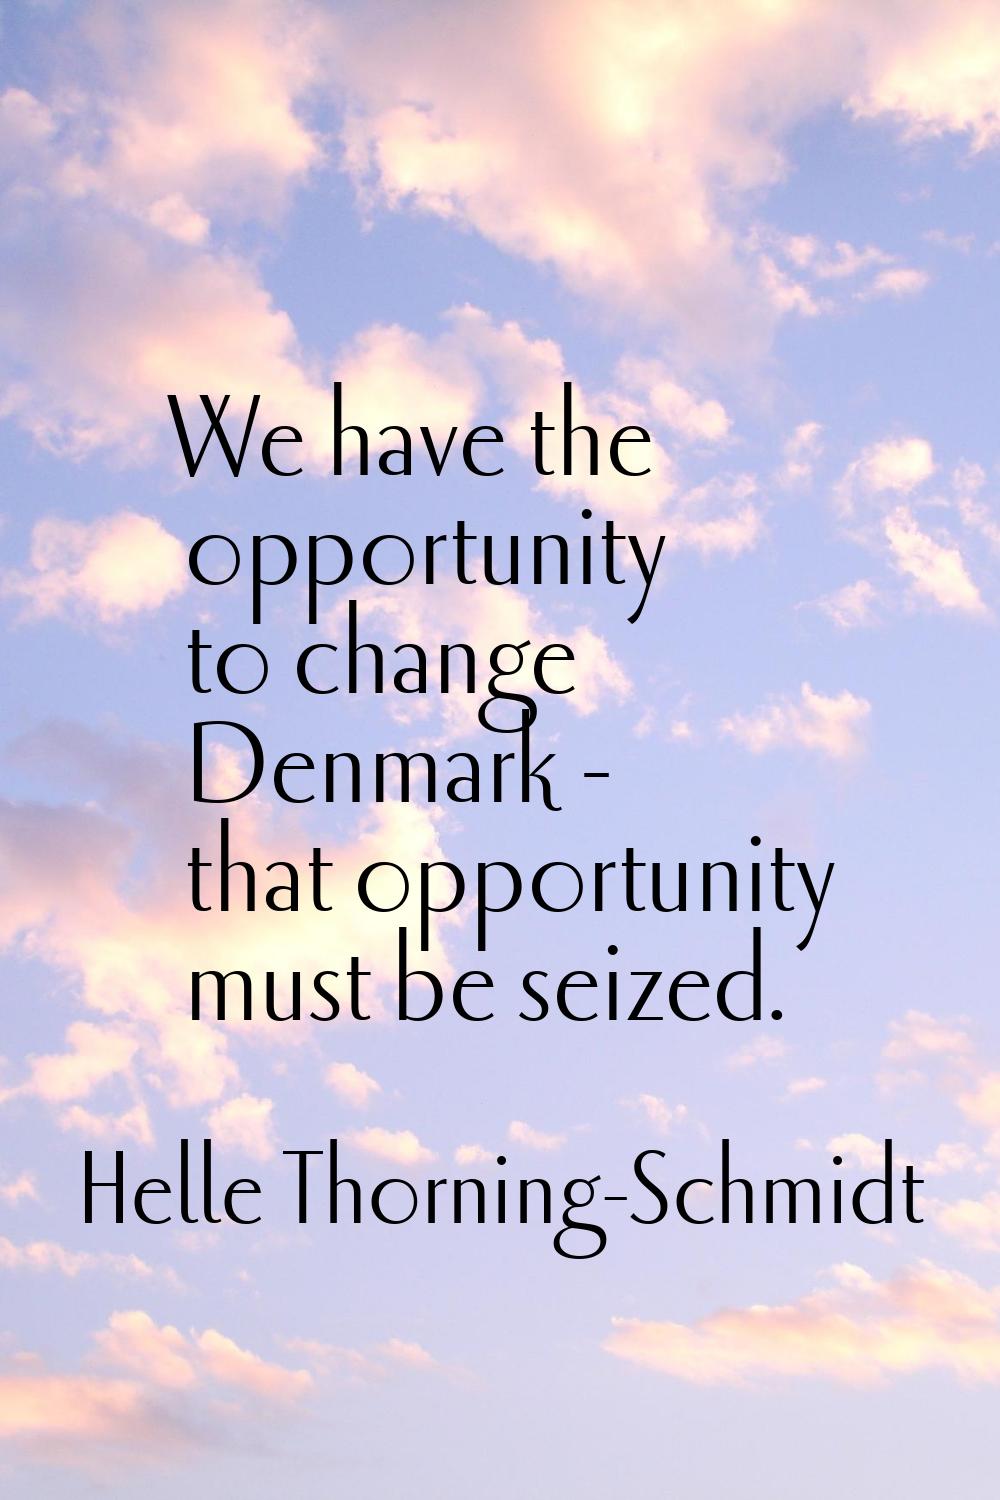 We have the opportunity to change Denmark - that opportunity must be seized.